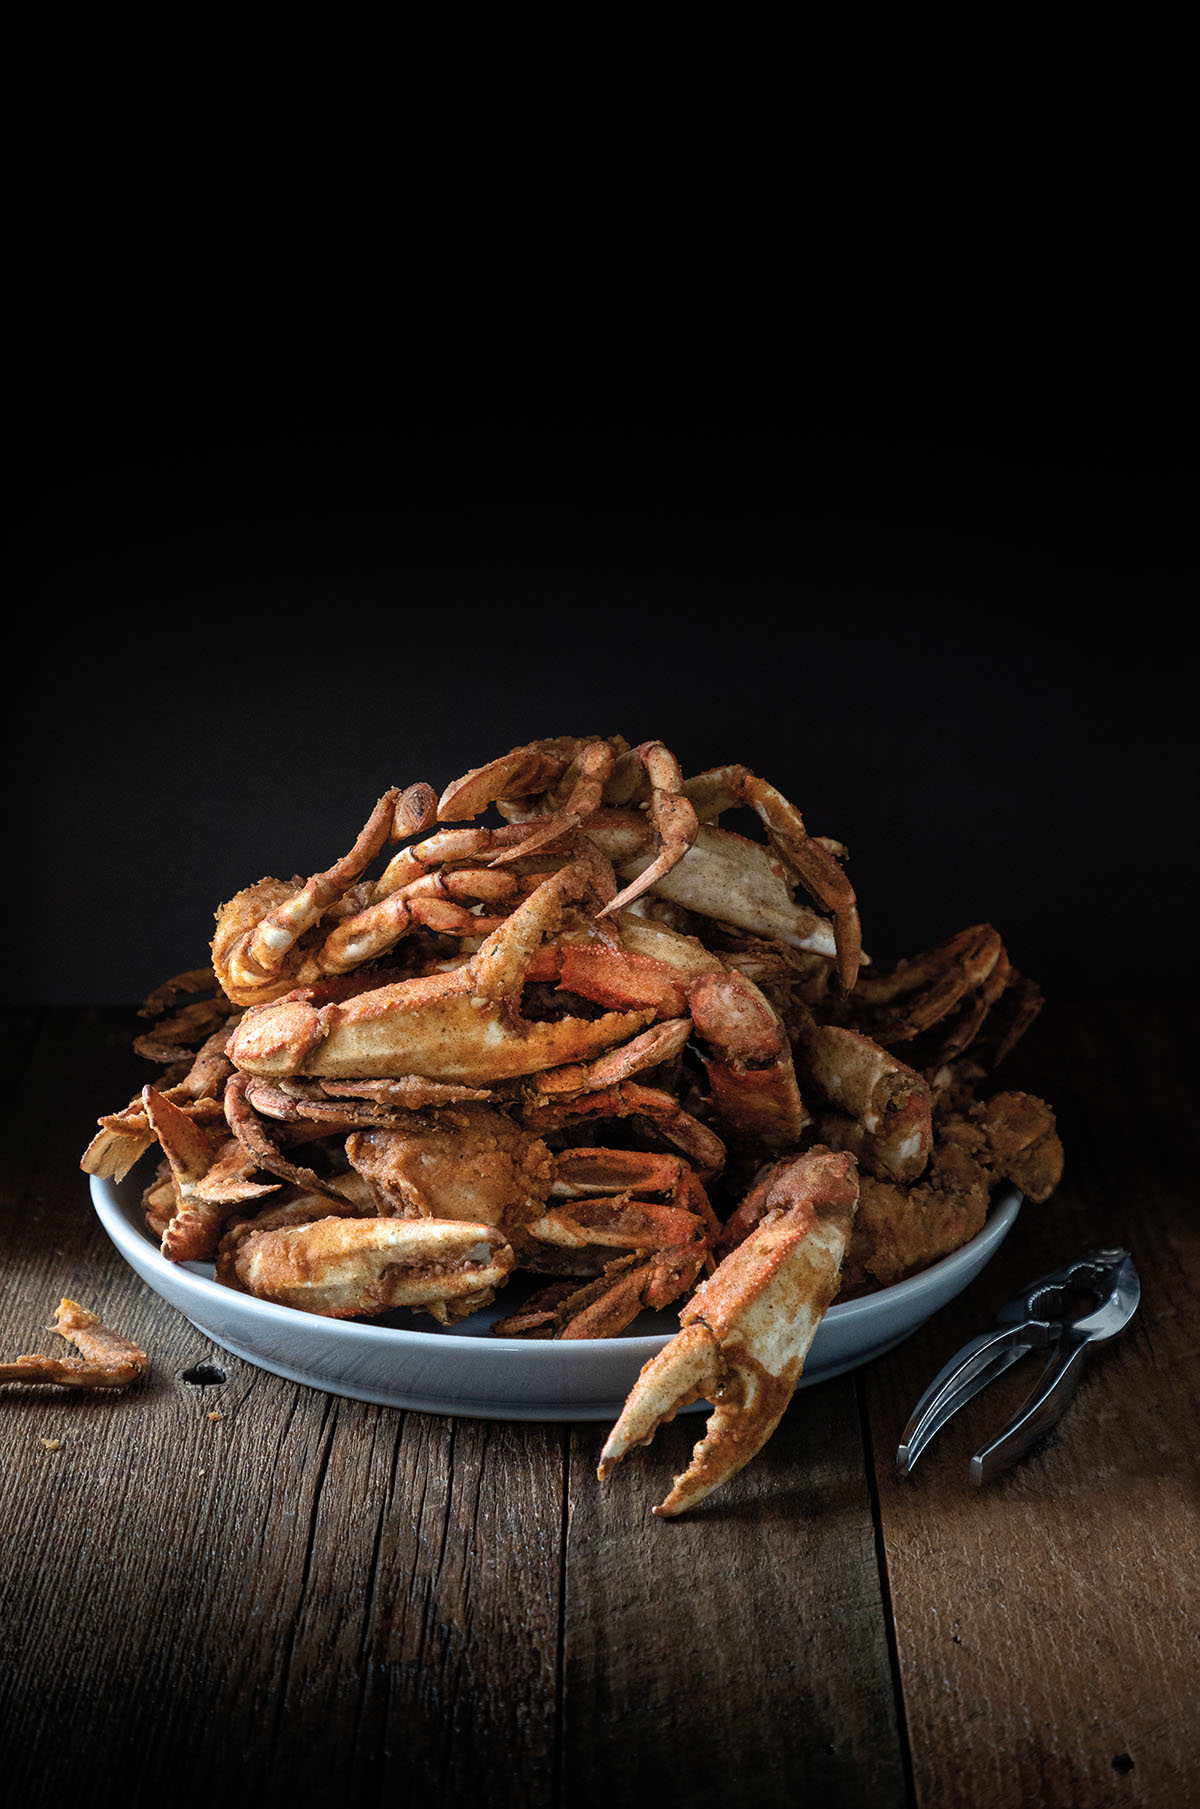 A pile of reddish-brown roasted crabs on a platter in front of a black background